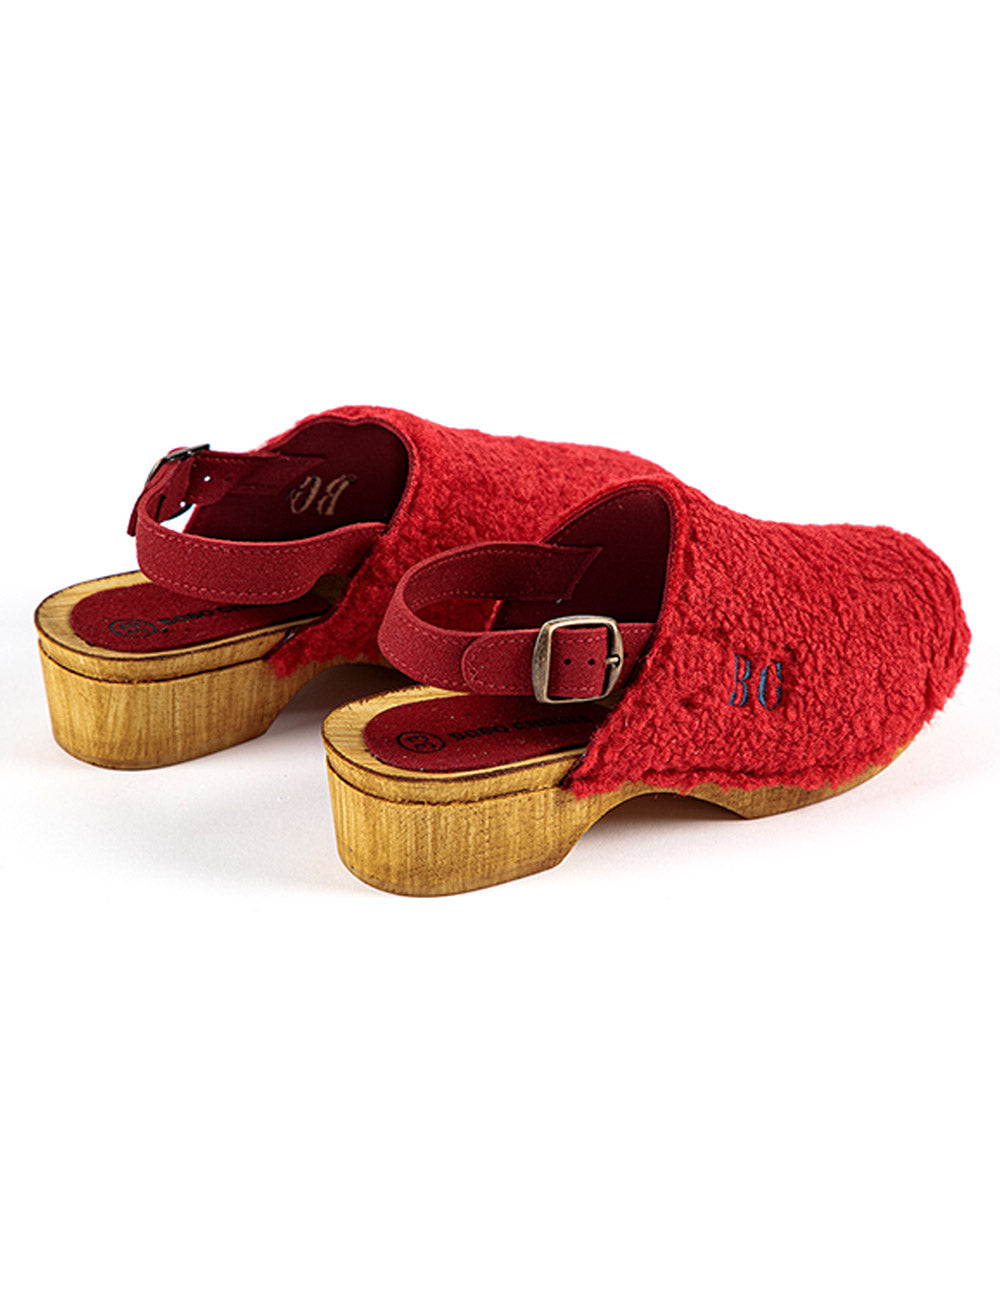 Fuax-Shearling-Clogs-100320694RED-Image-2